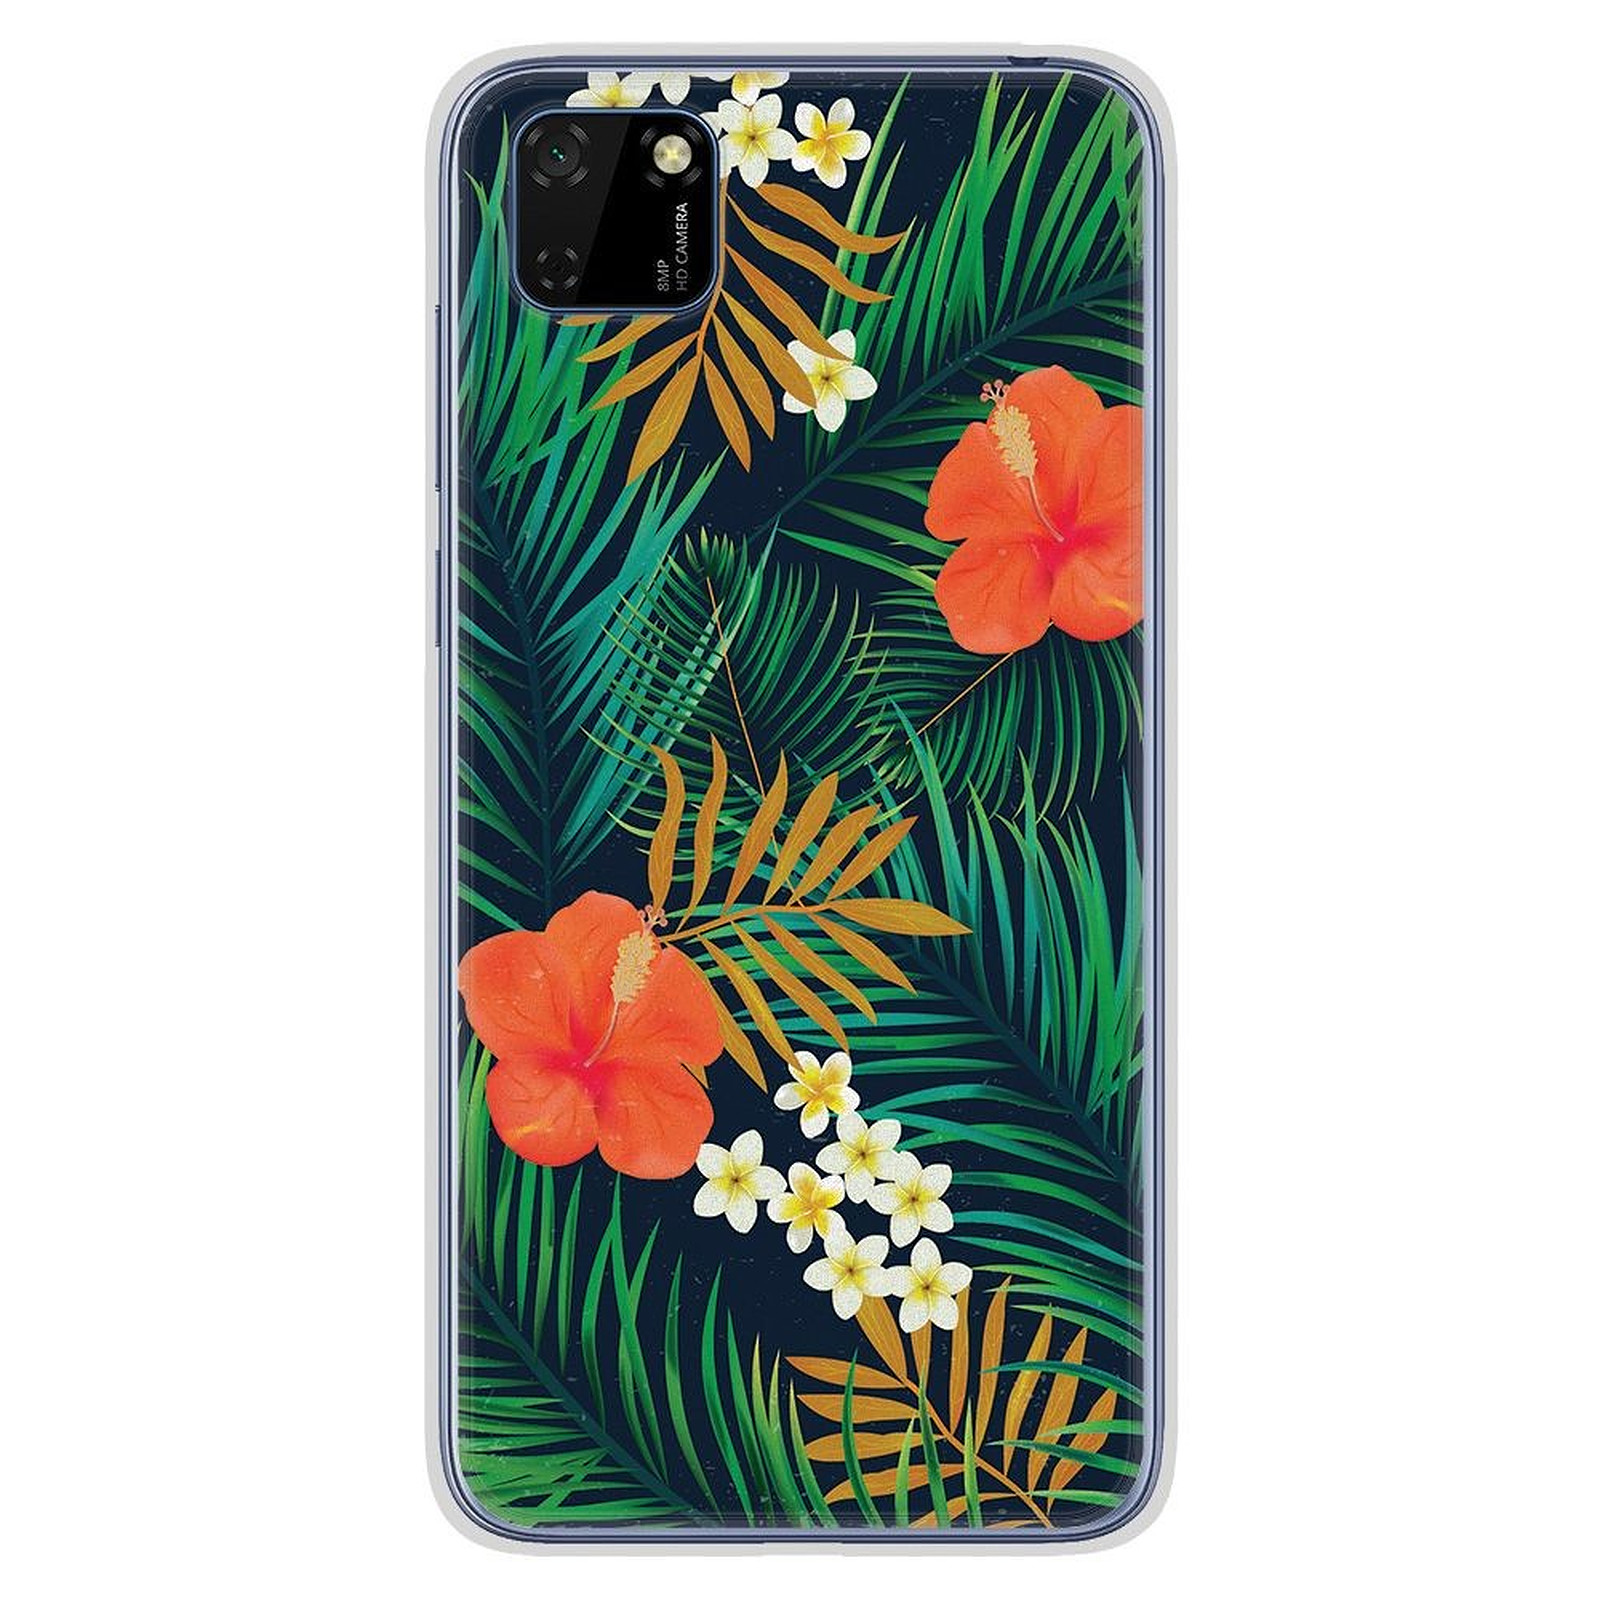 1001 Coques Coque silicone gel Huawei Y5P motif Tropical - Coque telephone 1001Coques